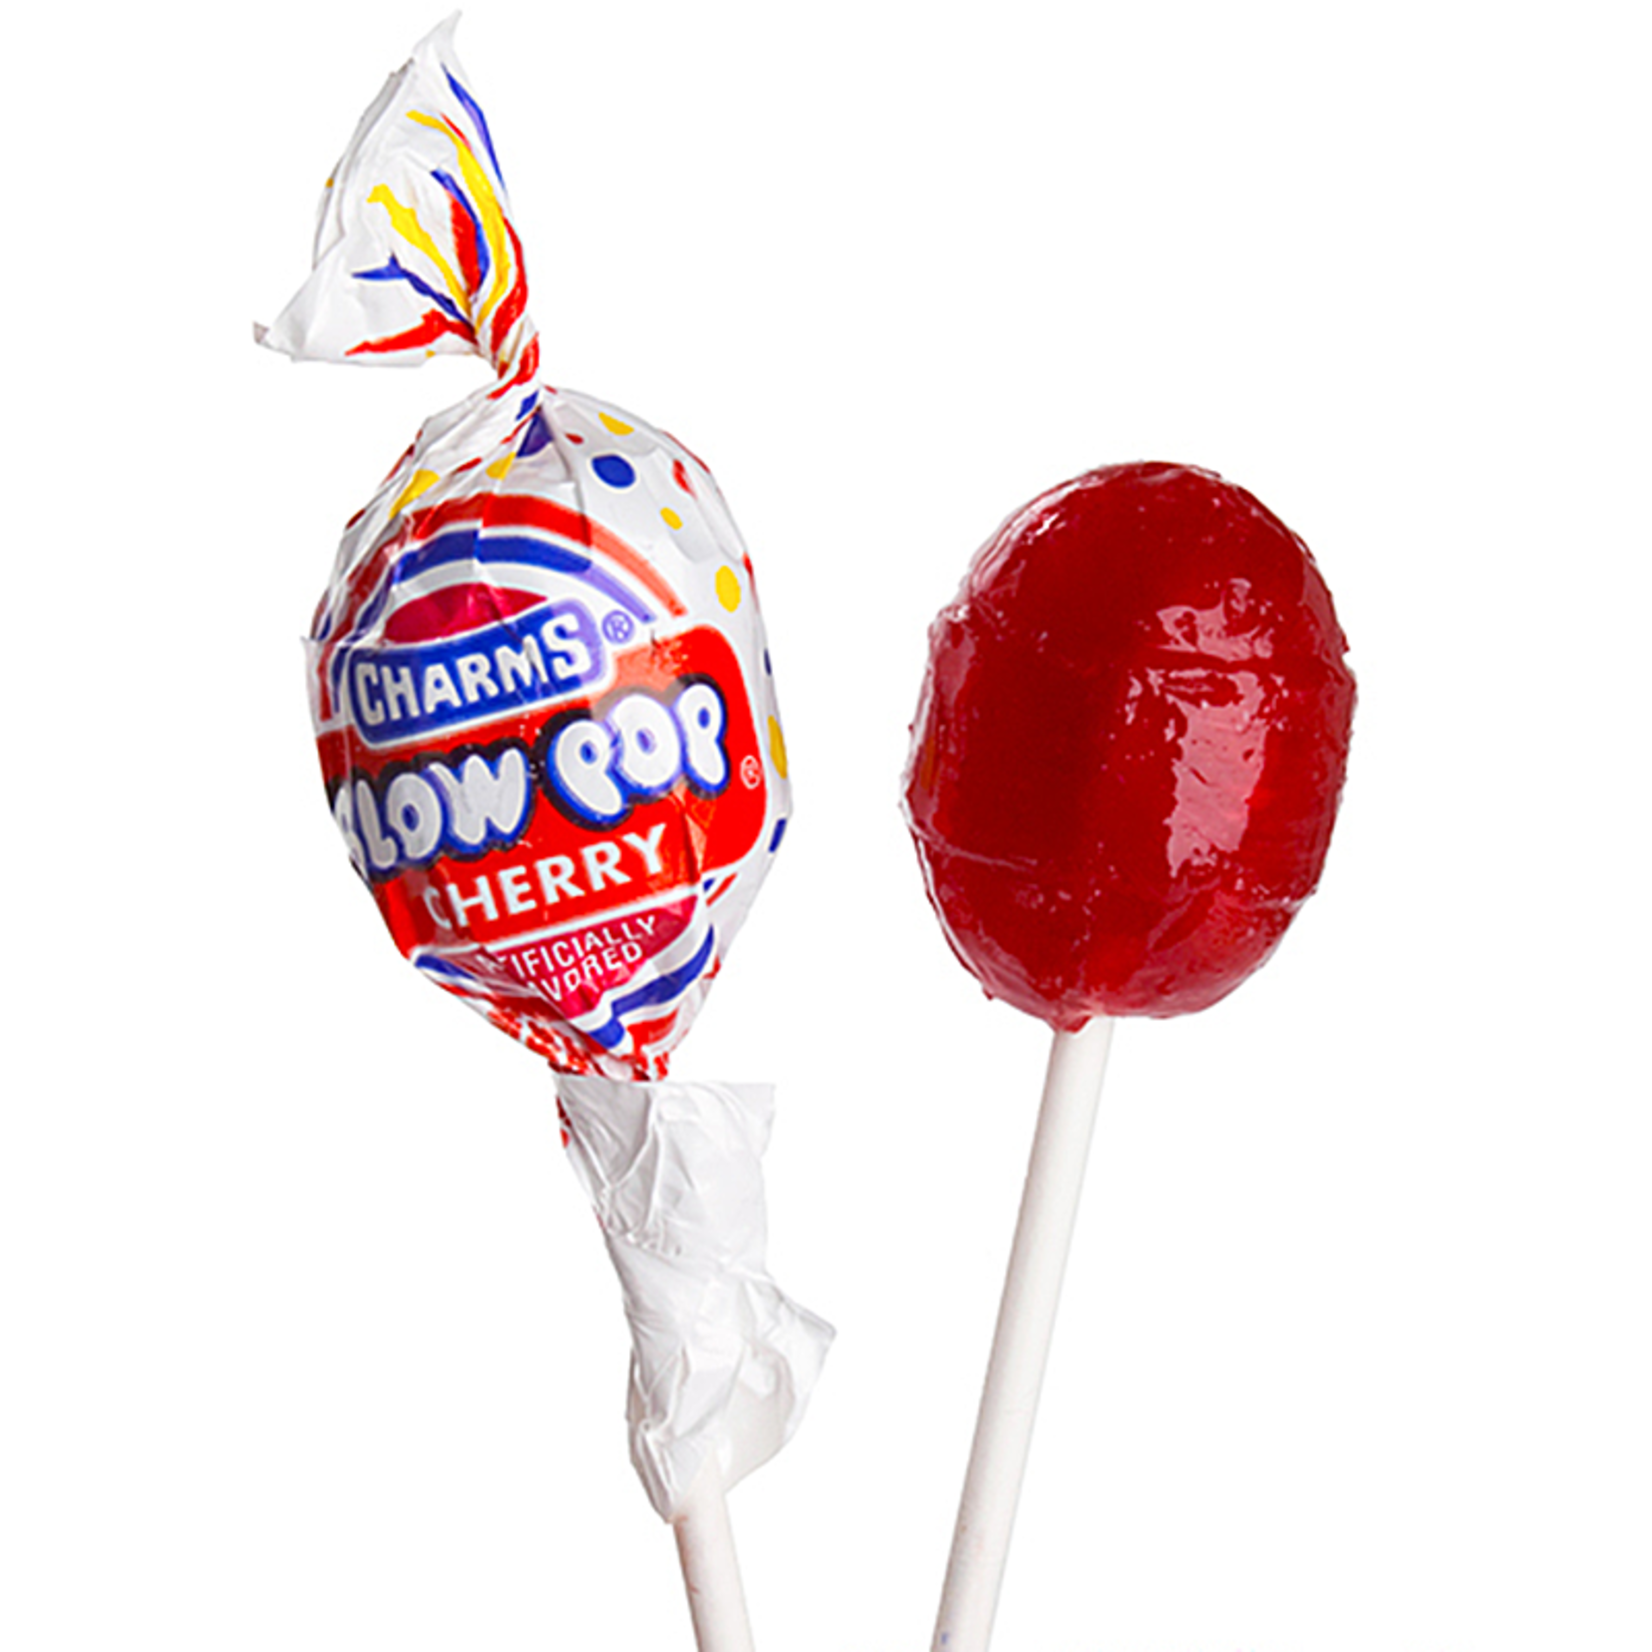 Charms Blow Pop Cherry 48ct.